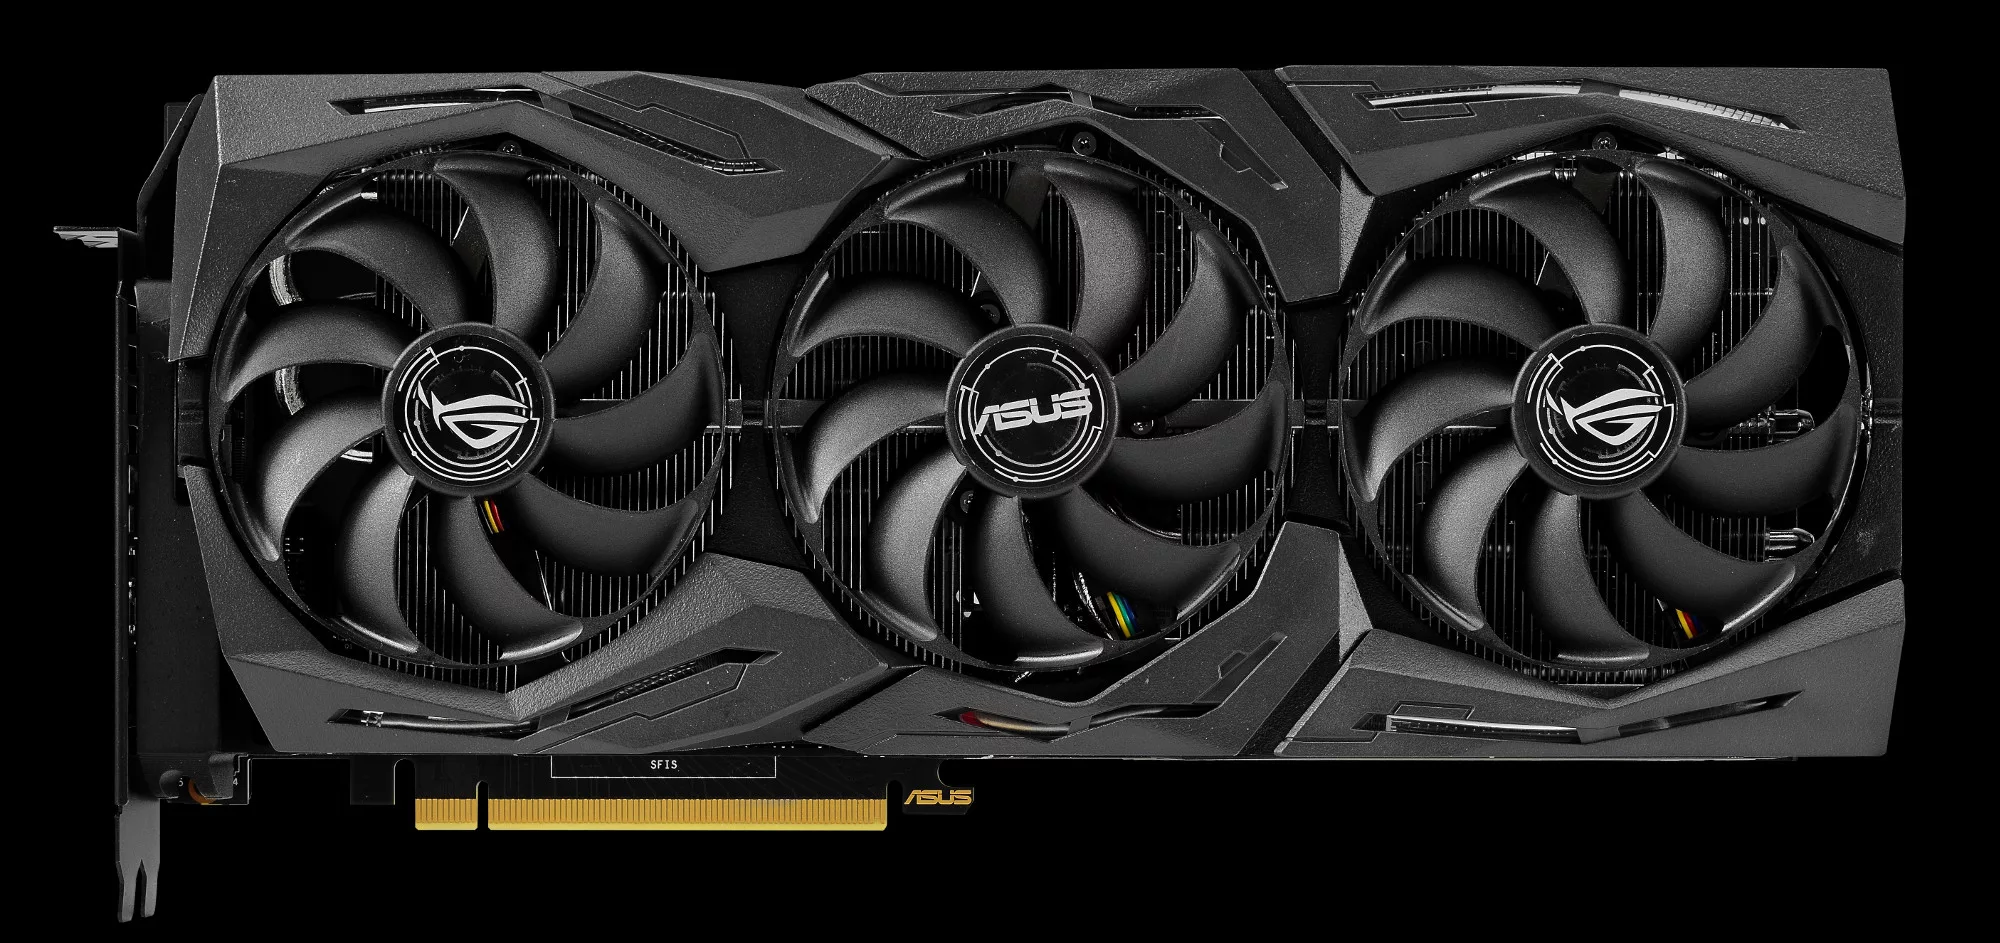 Introducing GeForce RTX 2080 Ti and RTX 2080 graphics cards from